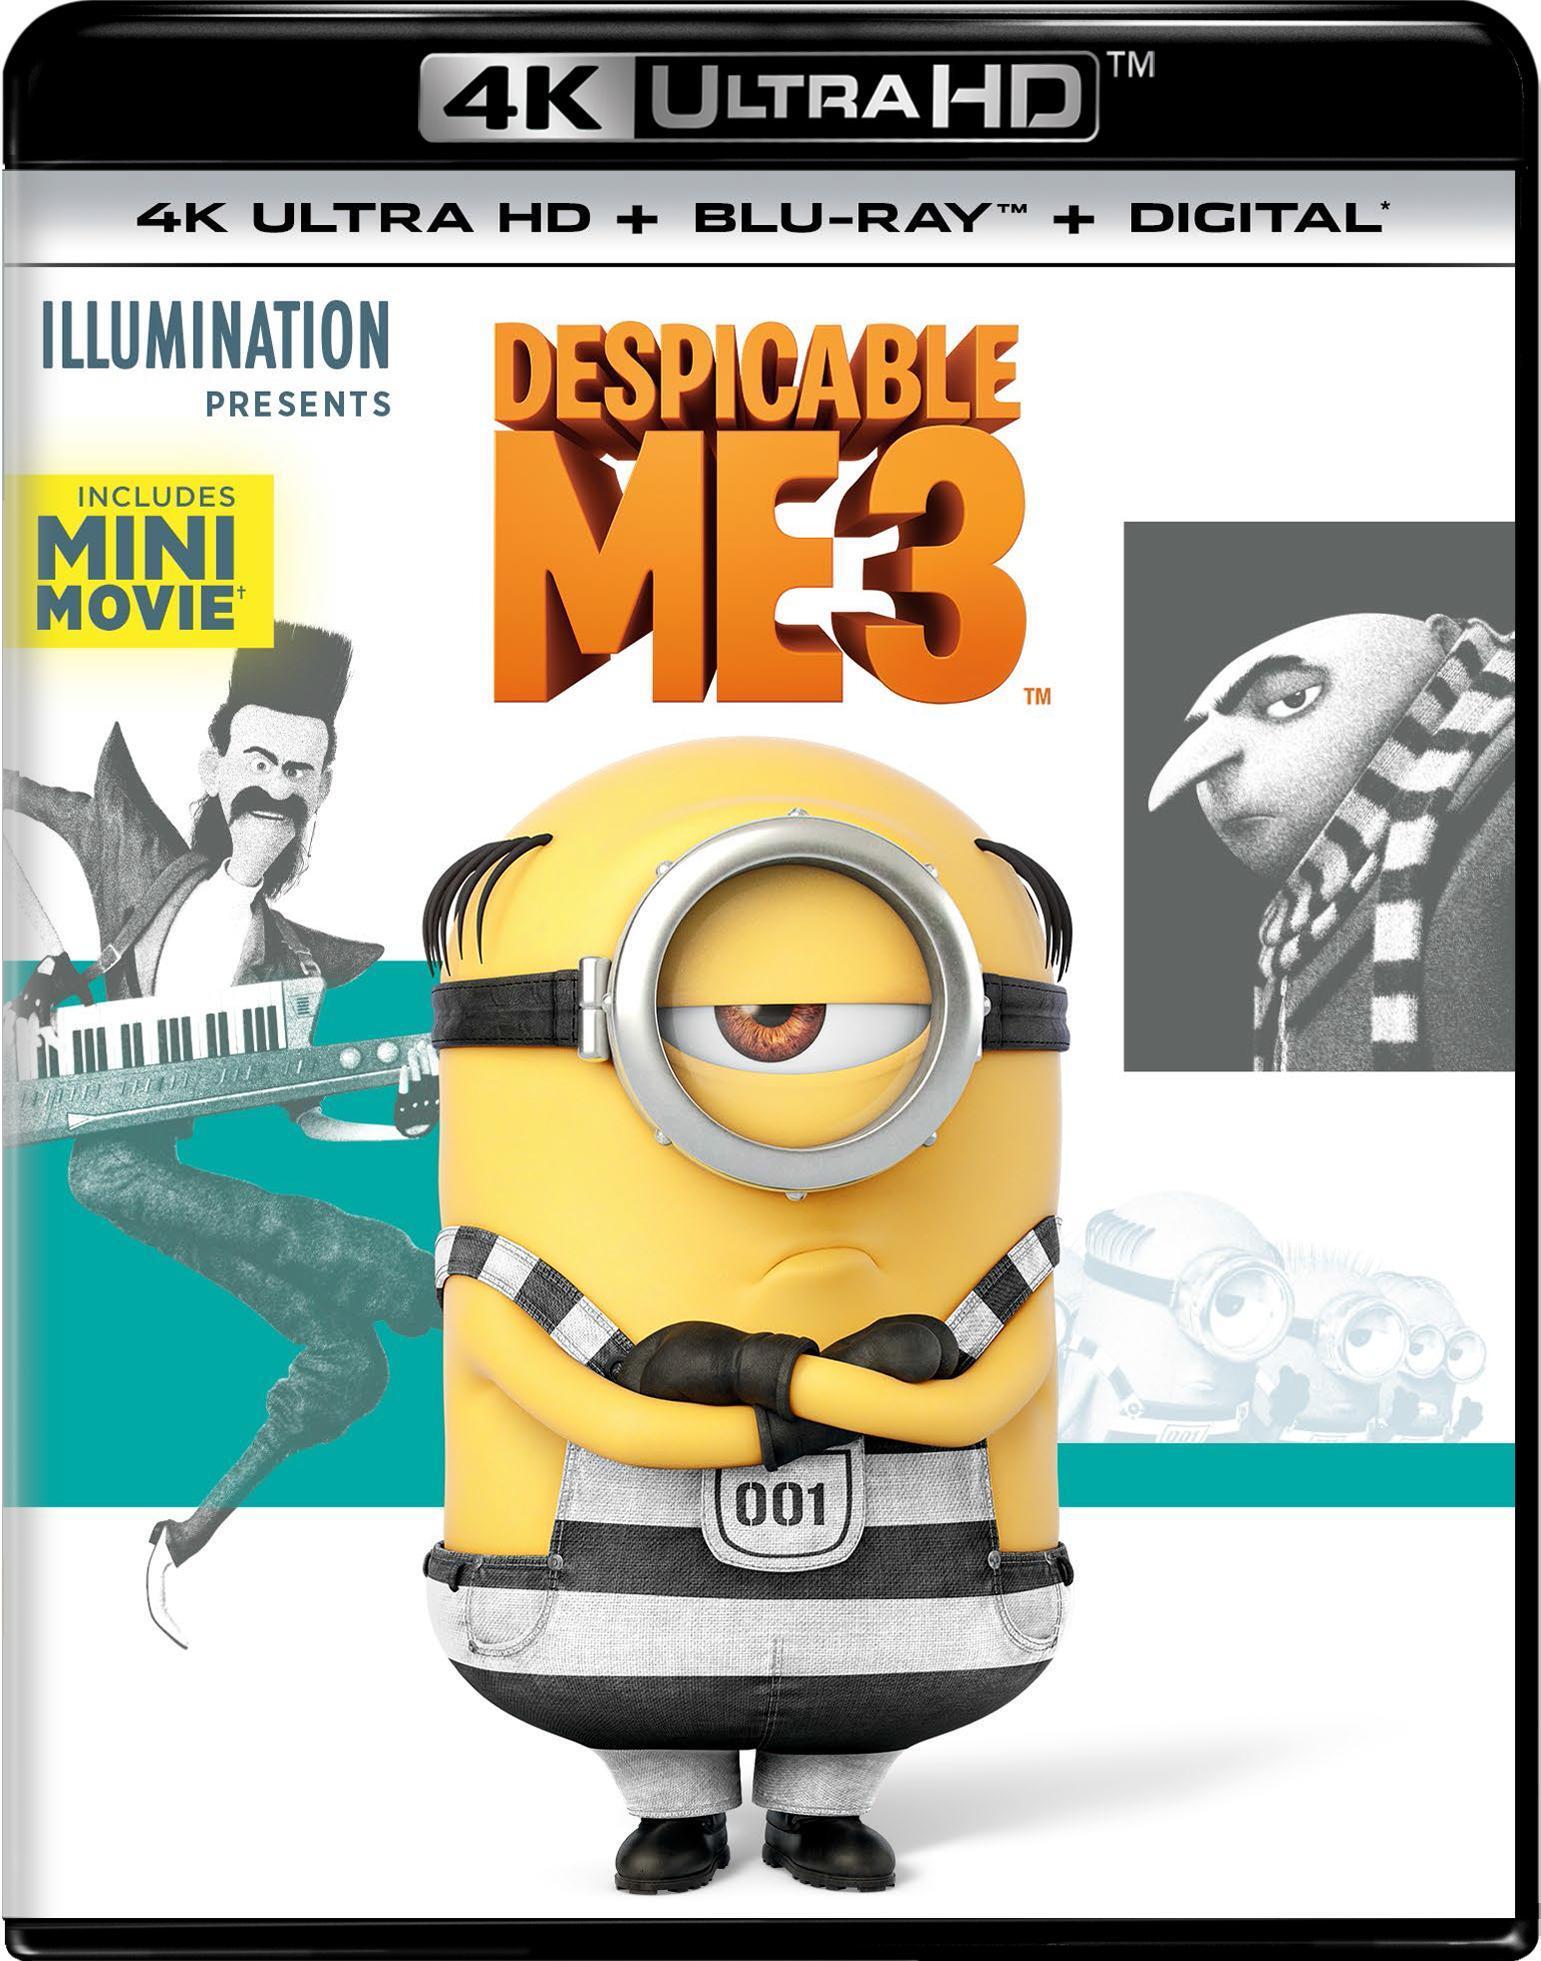 Despicable Me 3 (4K Ultra HD) - UHD [ 2017 ]  - Animation Movies On 4K Ultra HD Blu-ray - Movies On GRUV